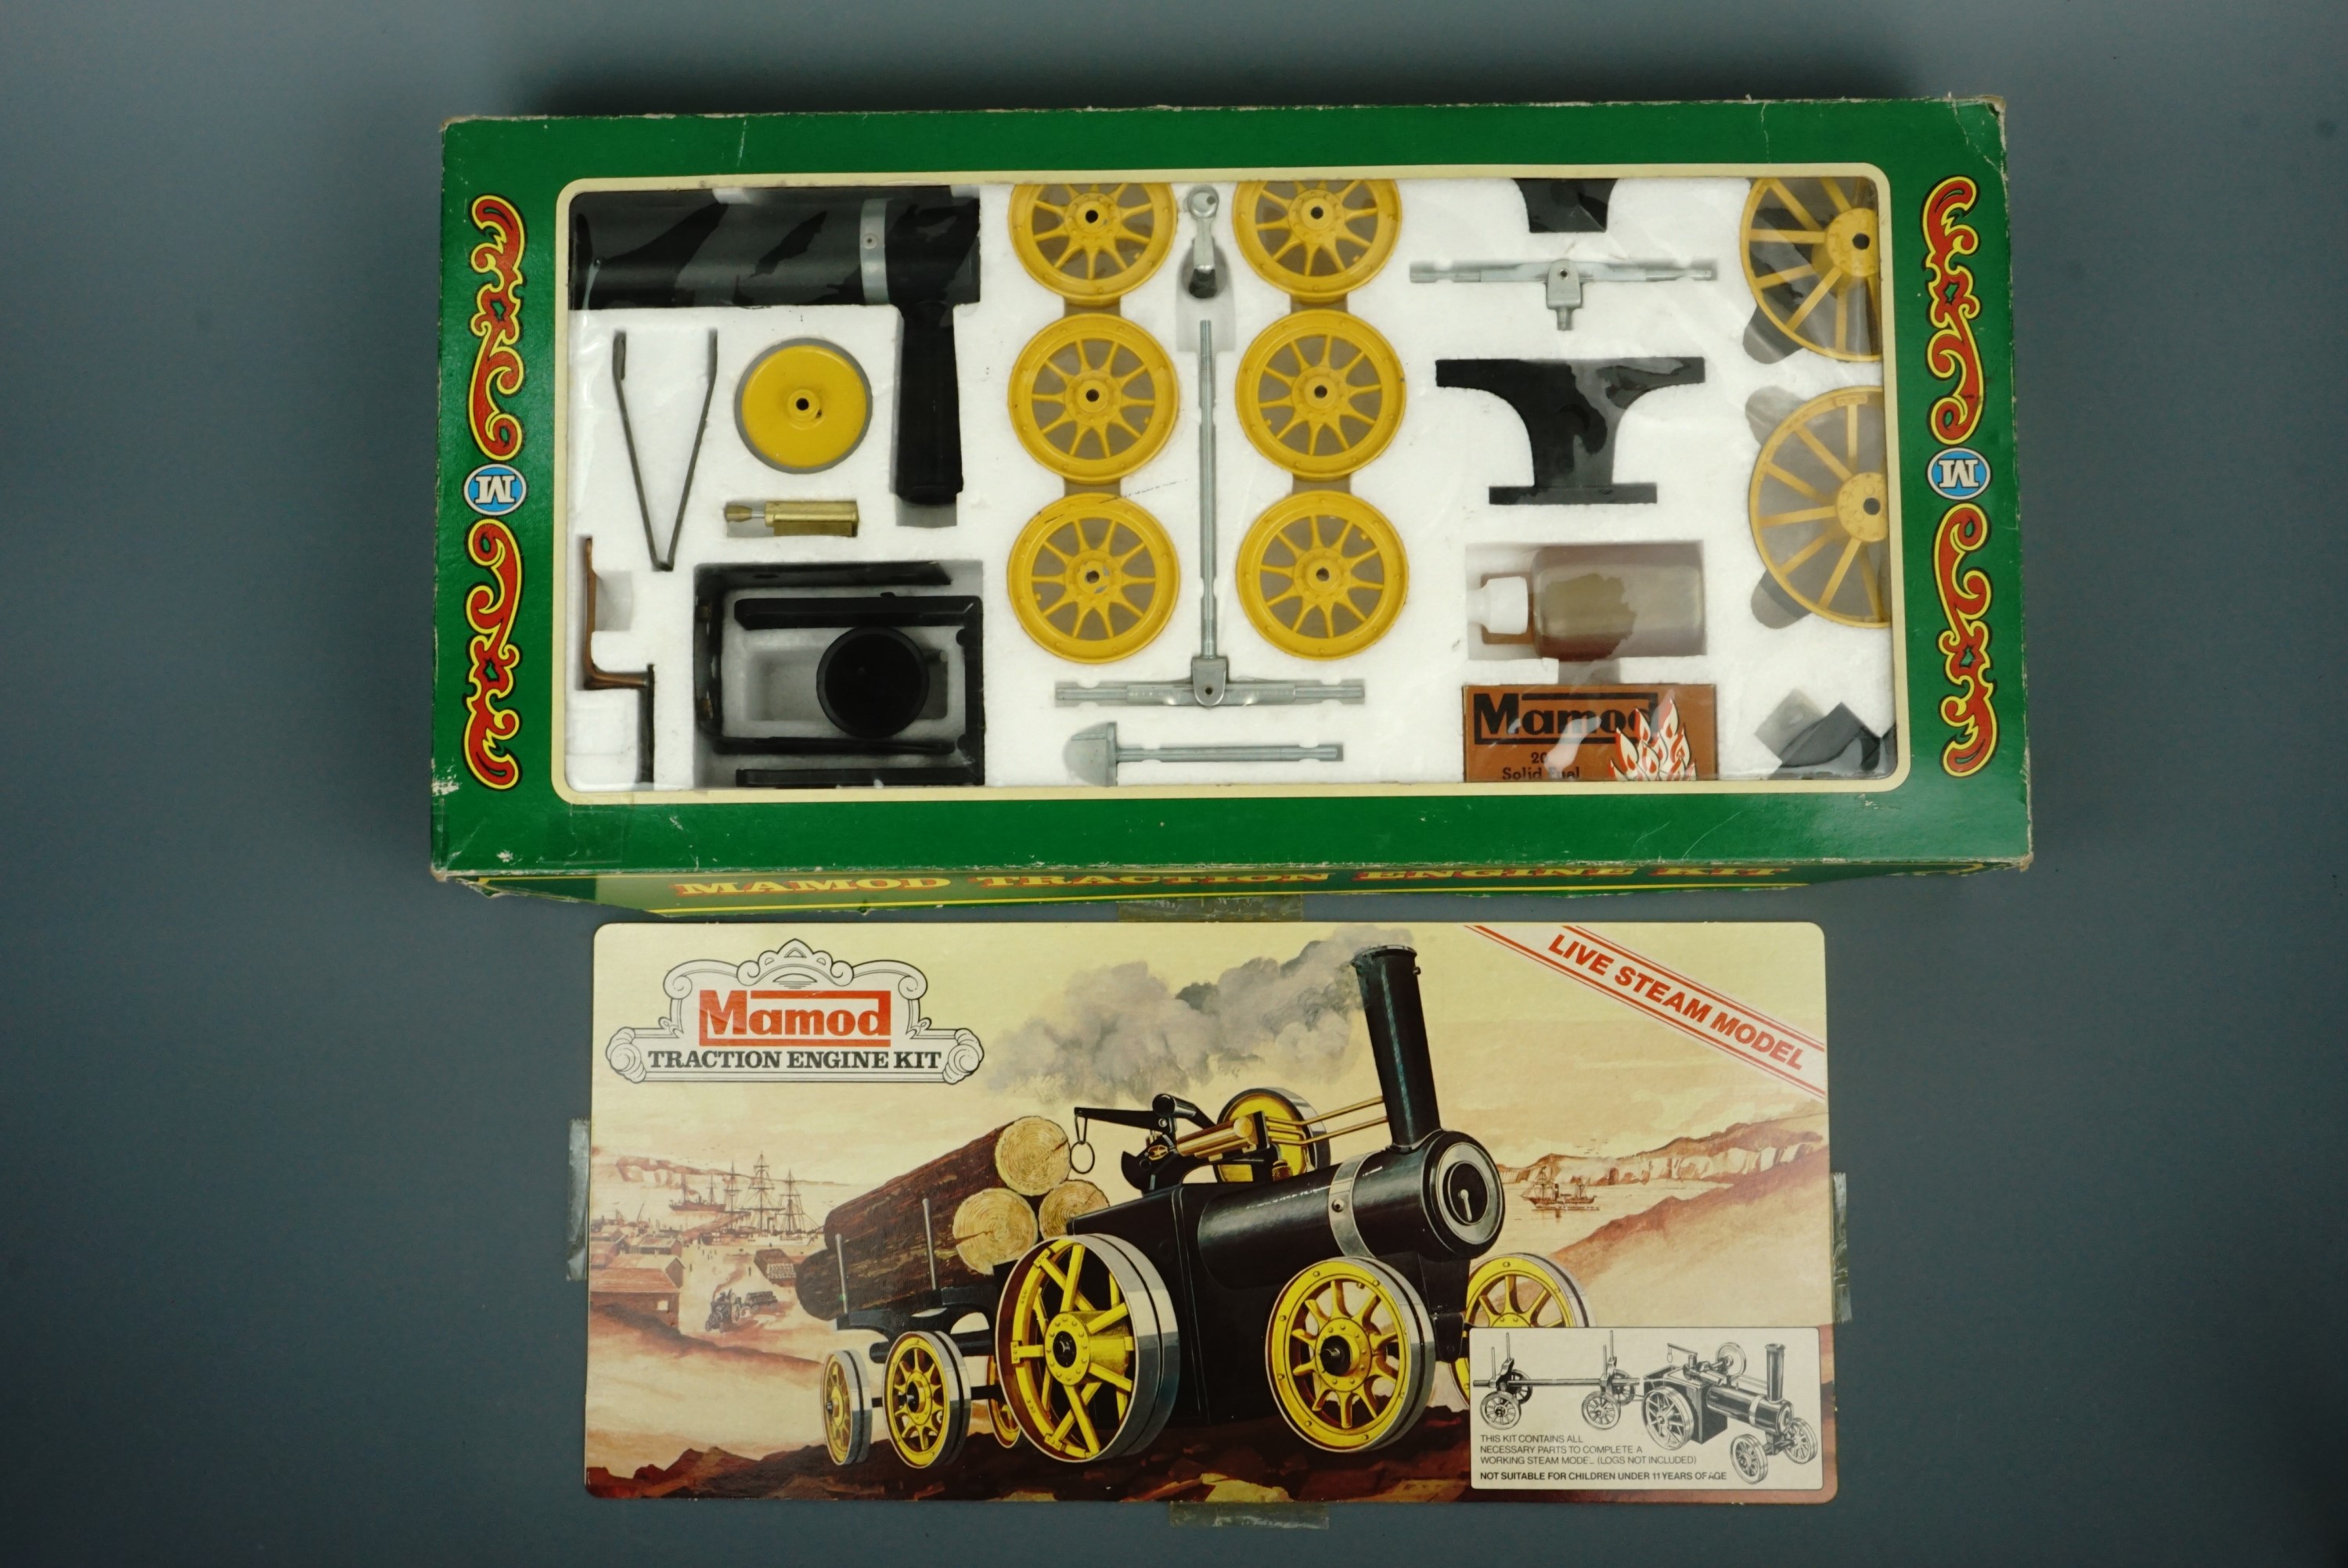 A Mamod live steam Traction Engine Kit, in original carton